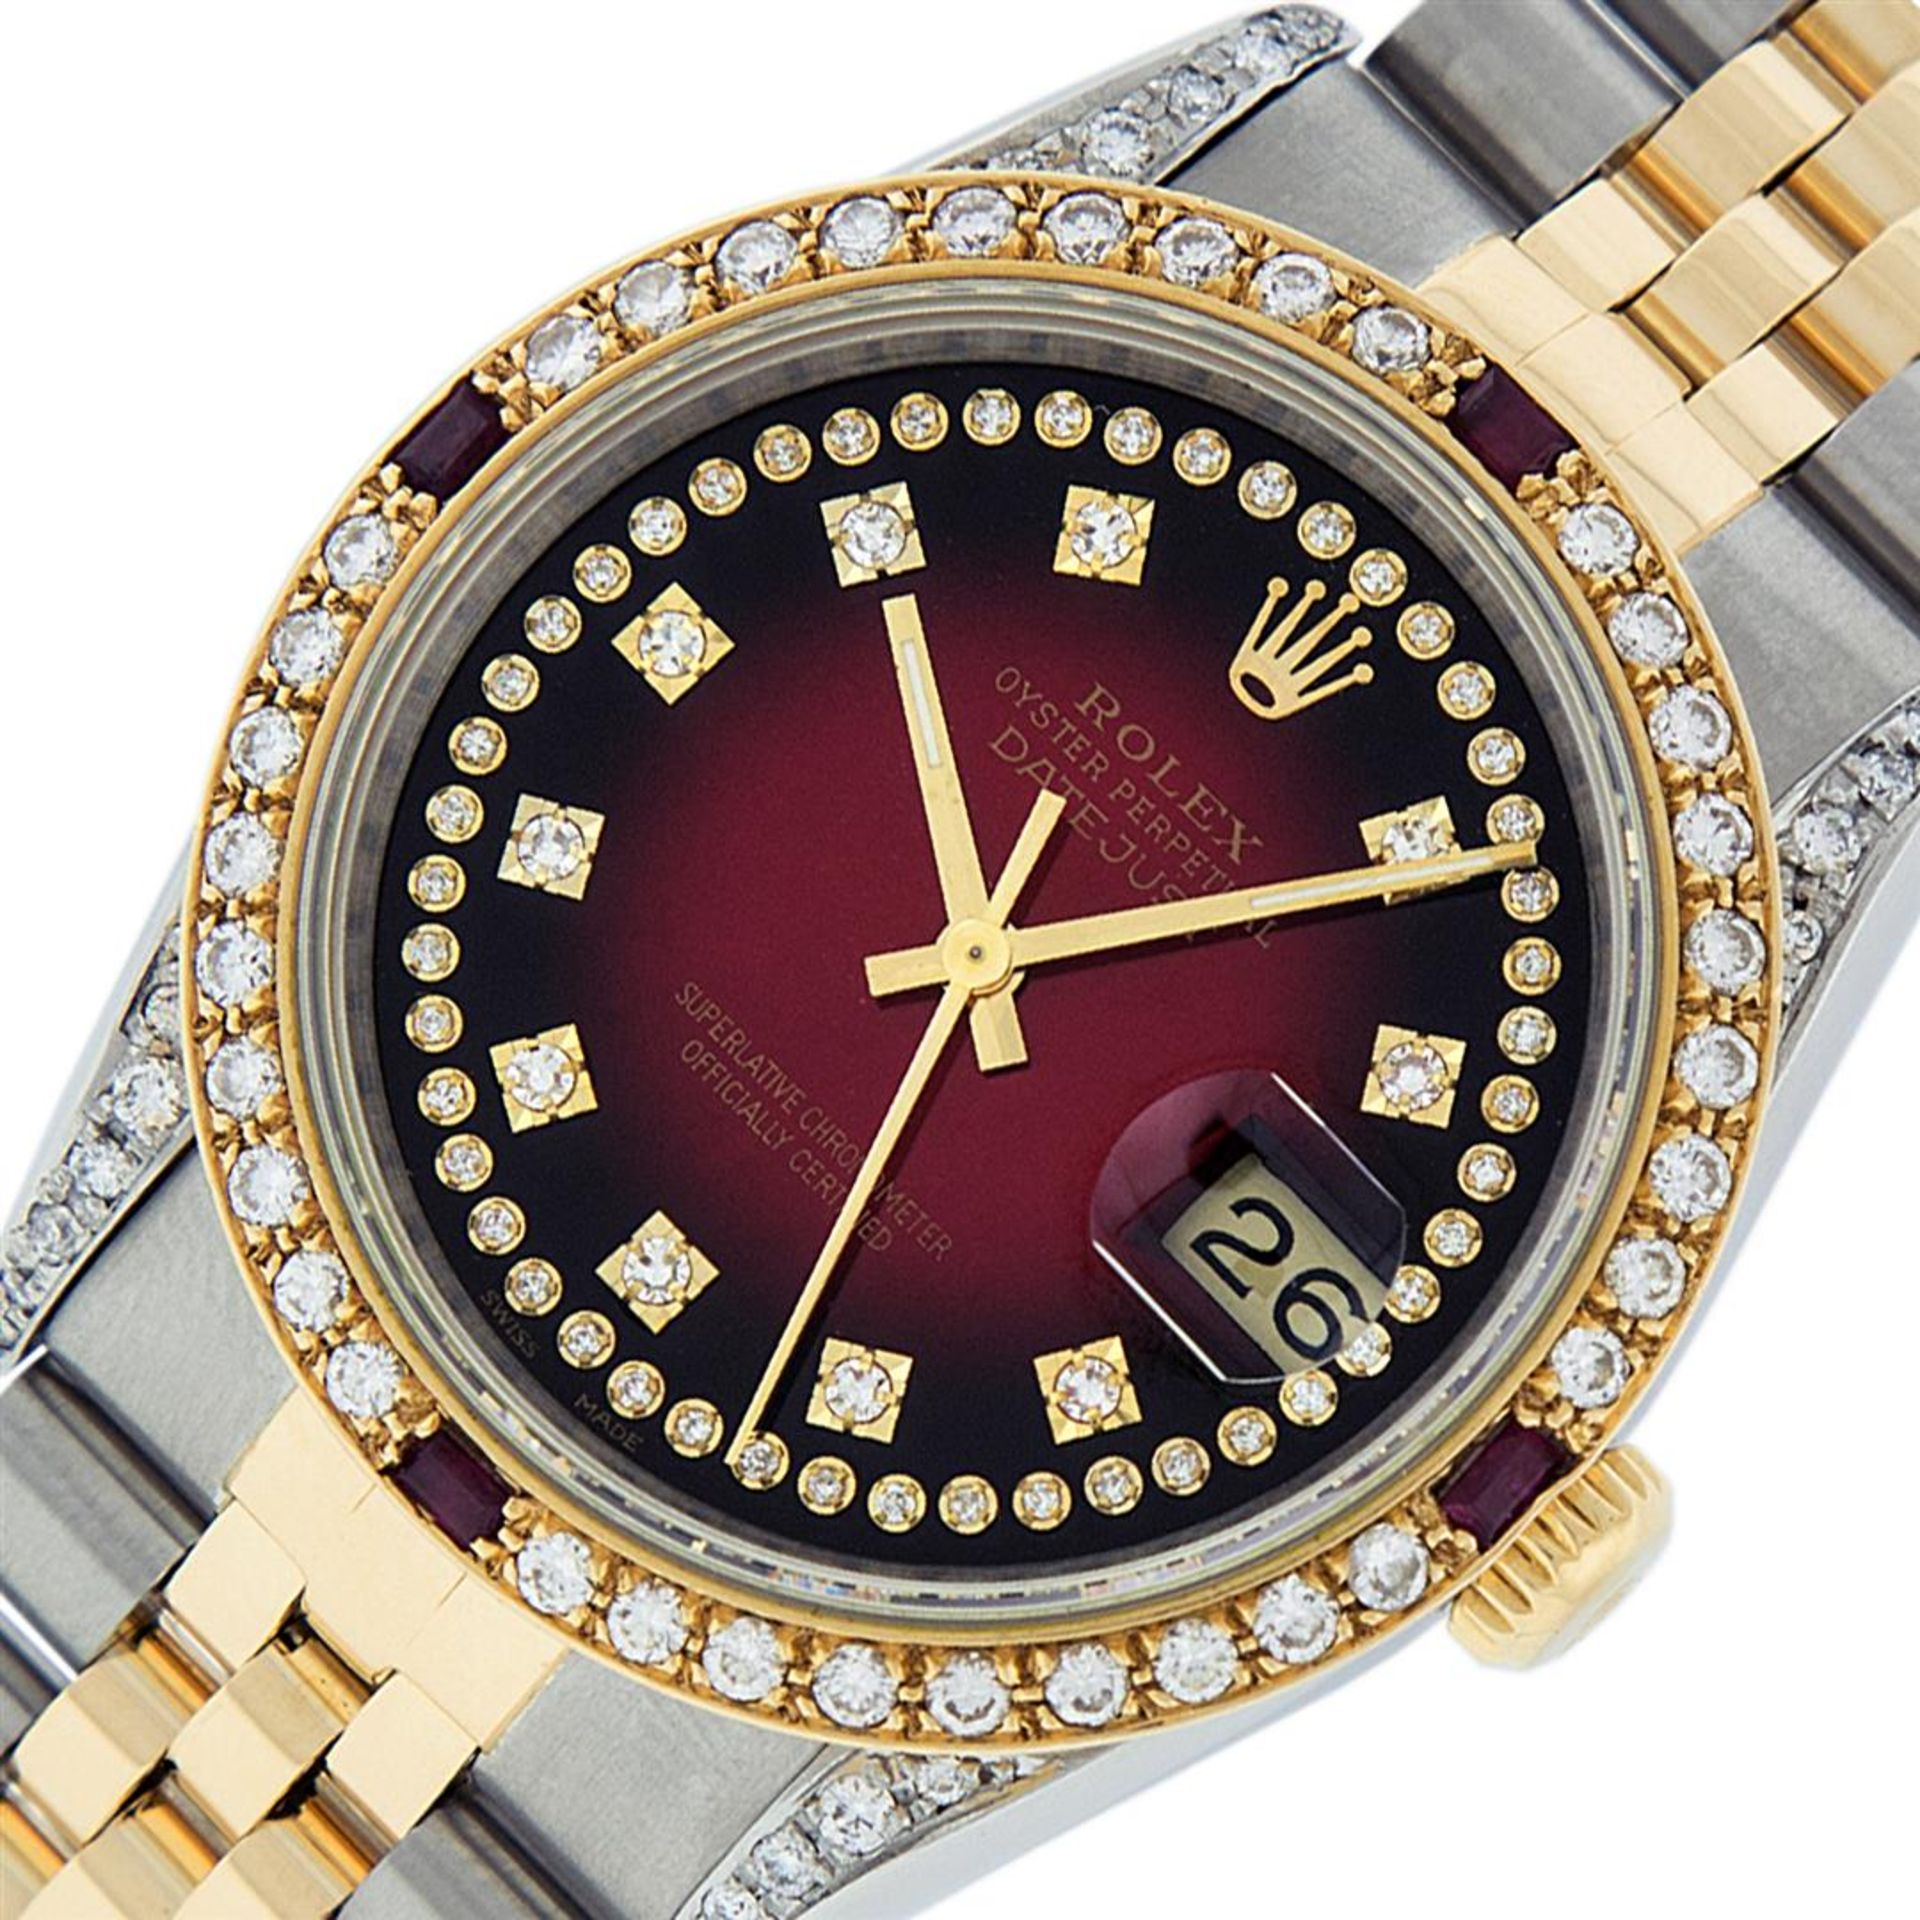 Rolex Mens 2 Tone Lugs Red Vignette Diamond String & Ruby Datejust Wristwatch - Image 2 of 9